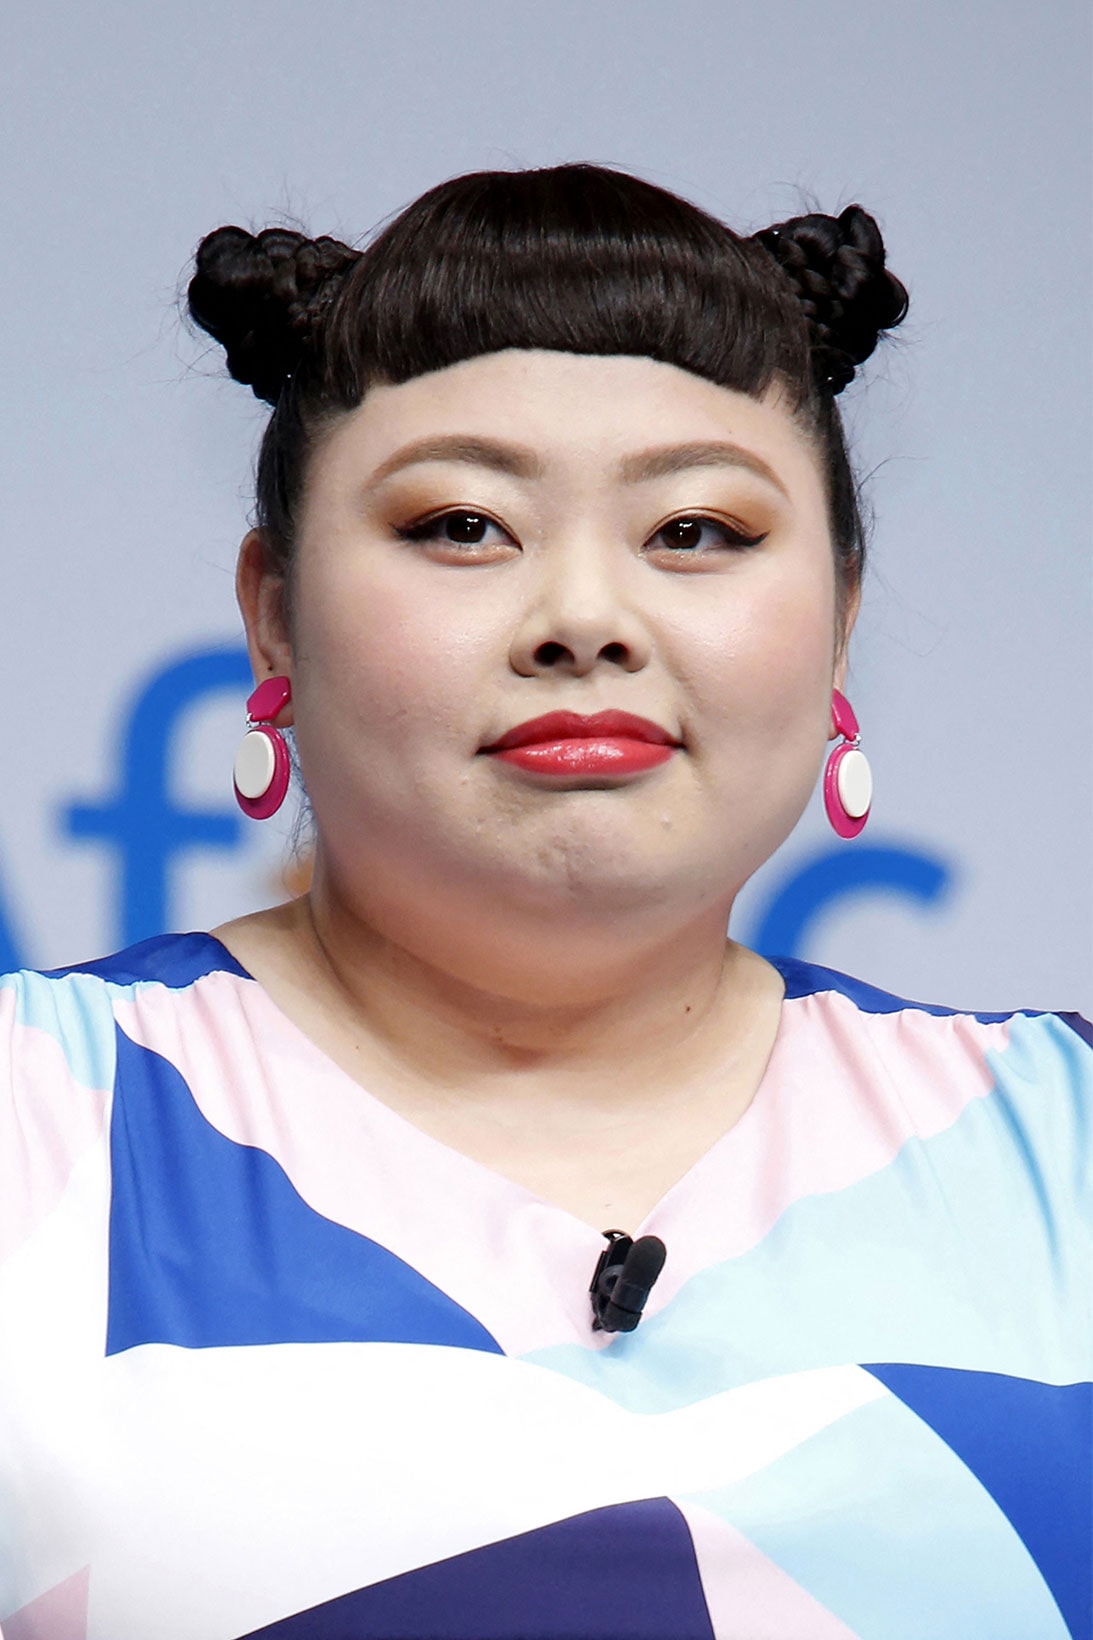 tokyo olympics olympig creative chief quits resigns female comedian body positivity naomi watanabe info